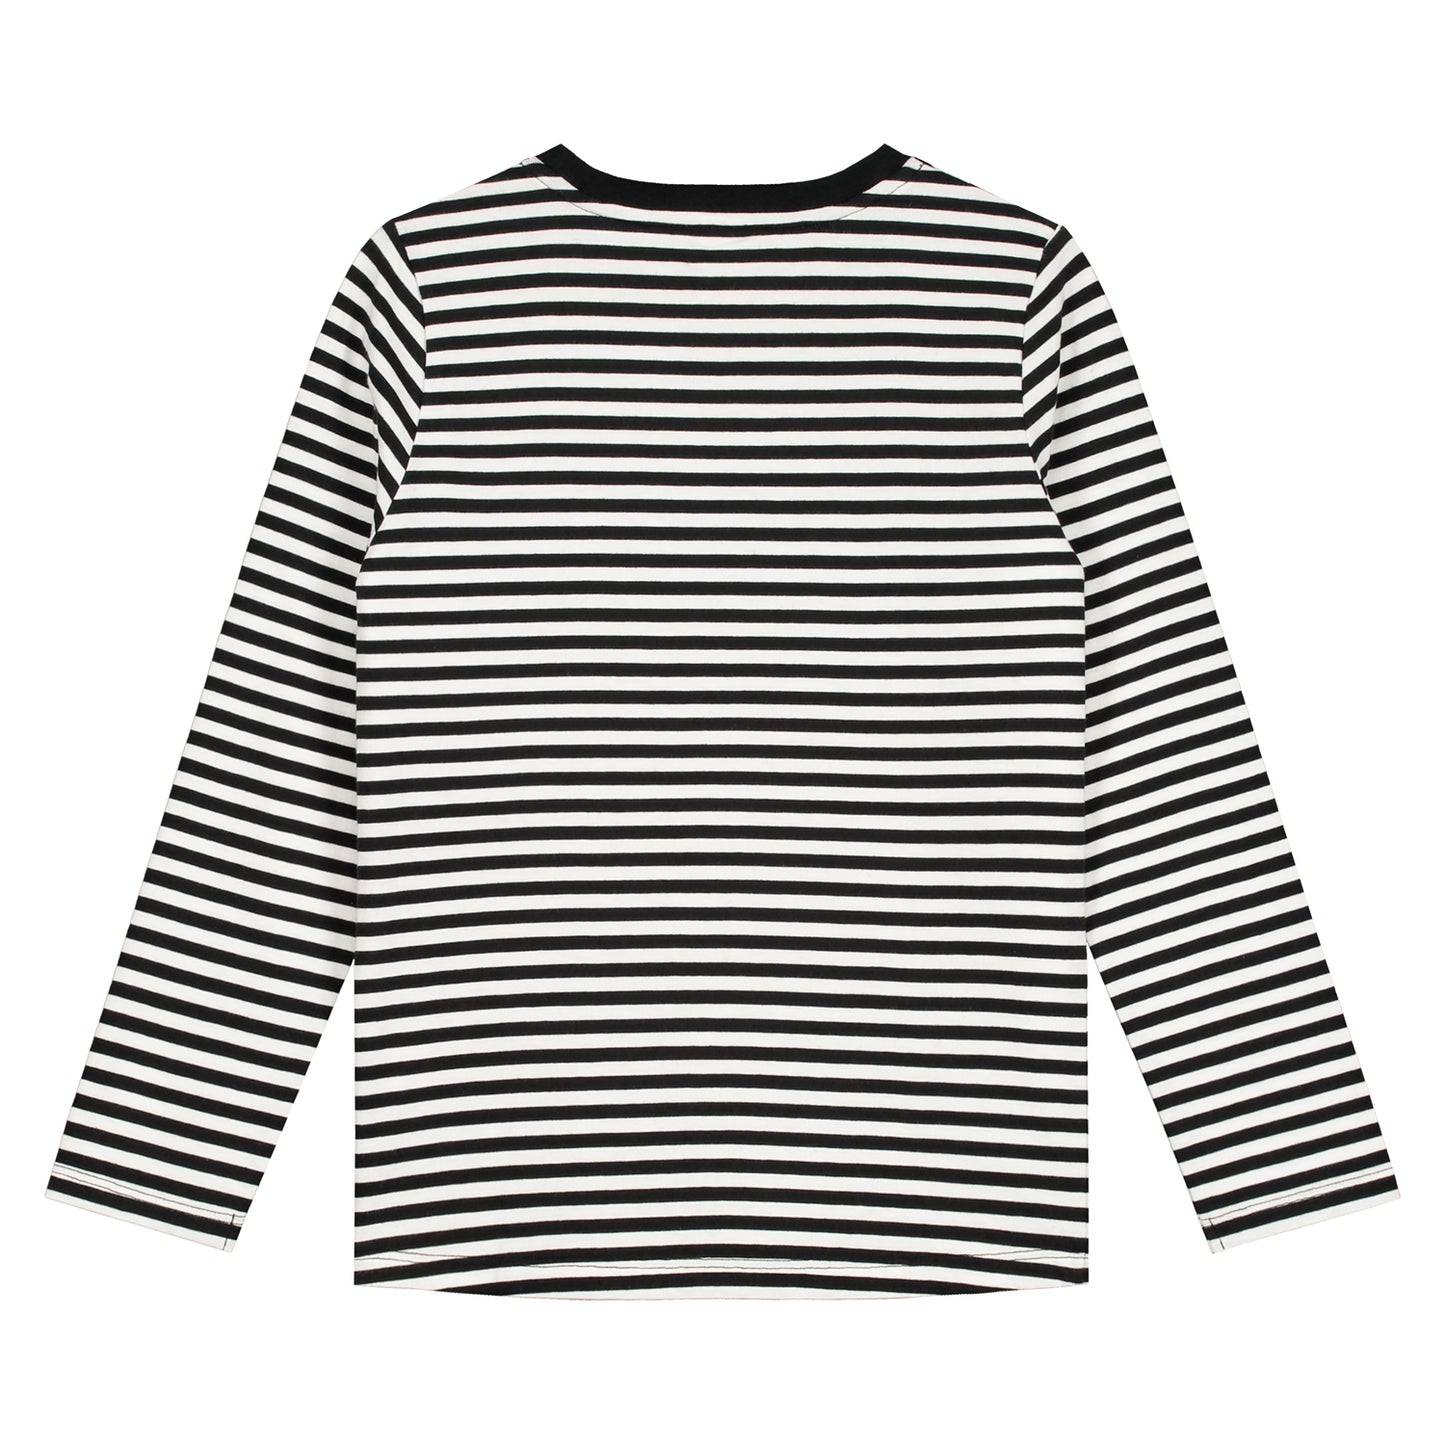 L/S Tee - Nearly Black/Off White